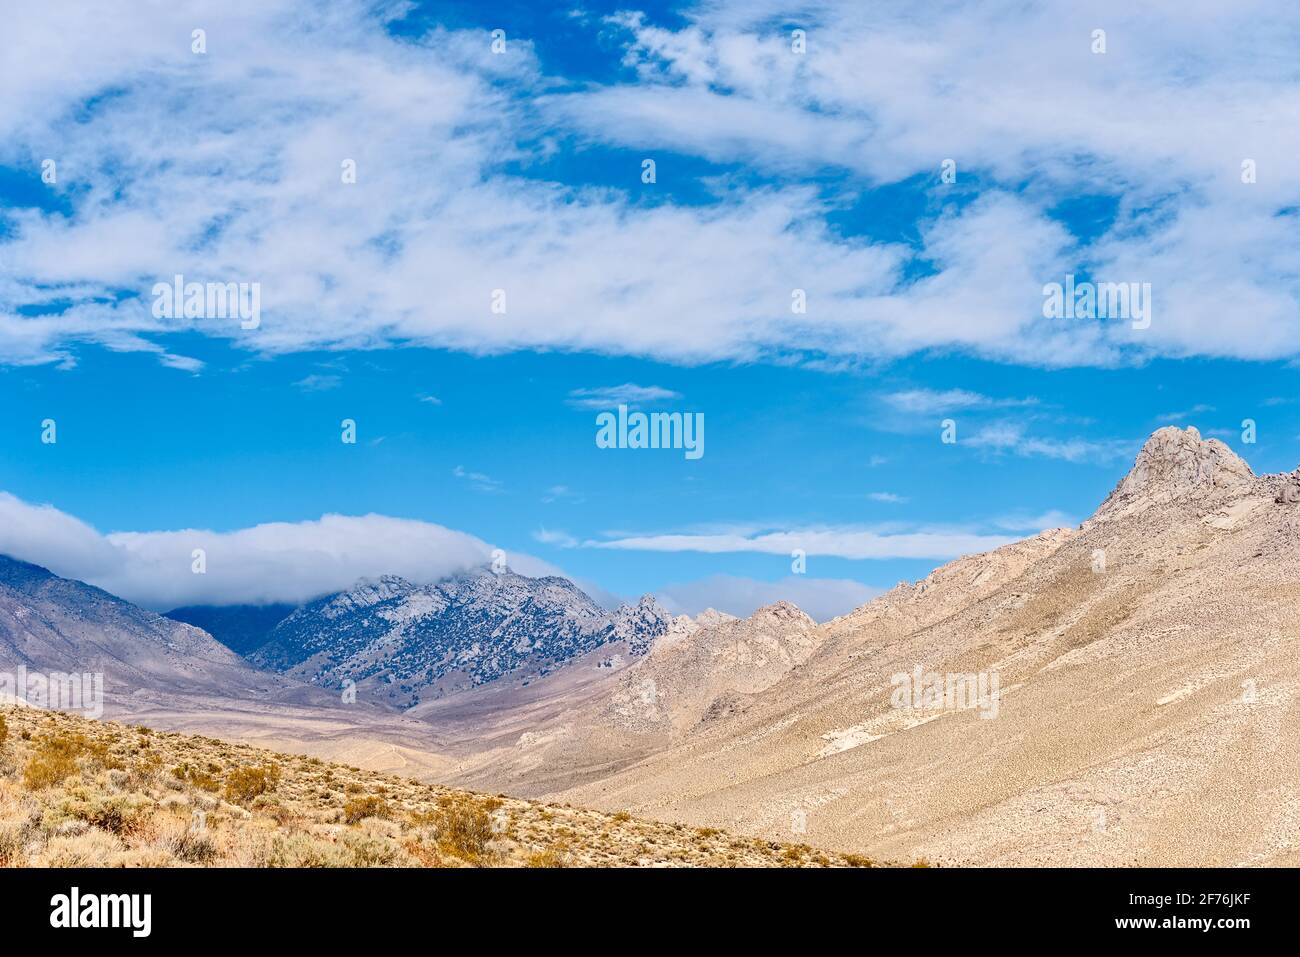 Blue mountains with white clouds following the contour of the peak. Barren brown mountain peak under blue skies with white fluffy clouds. Stock Photo